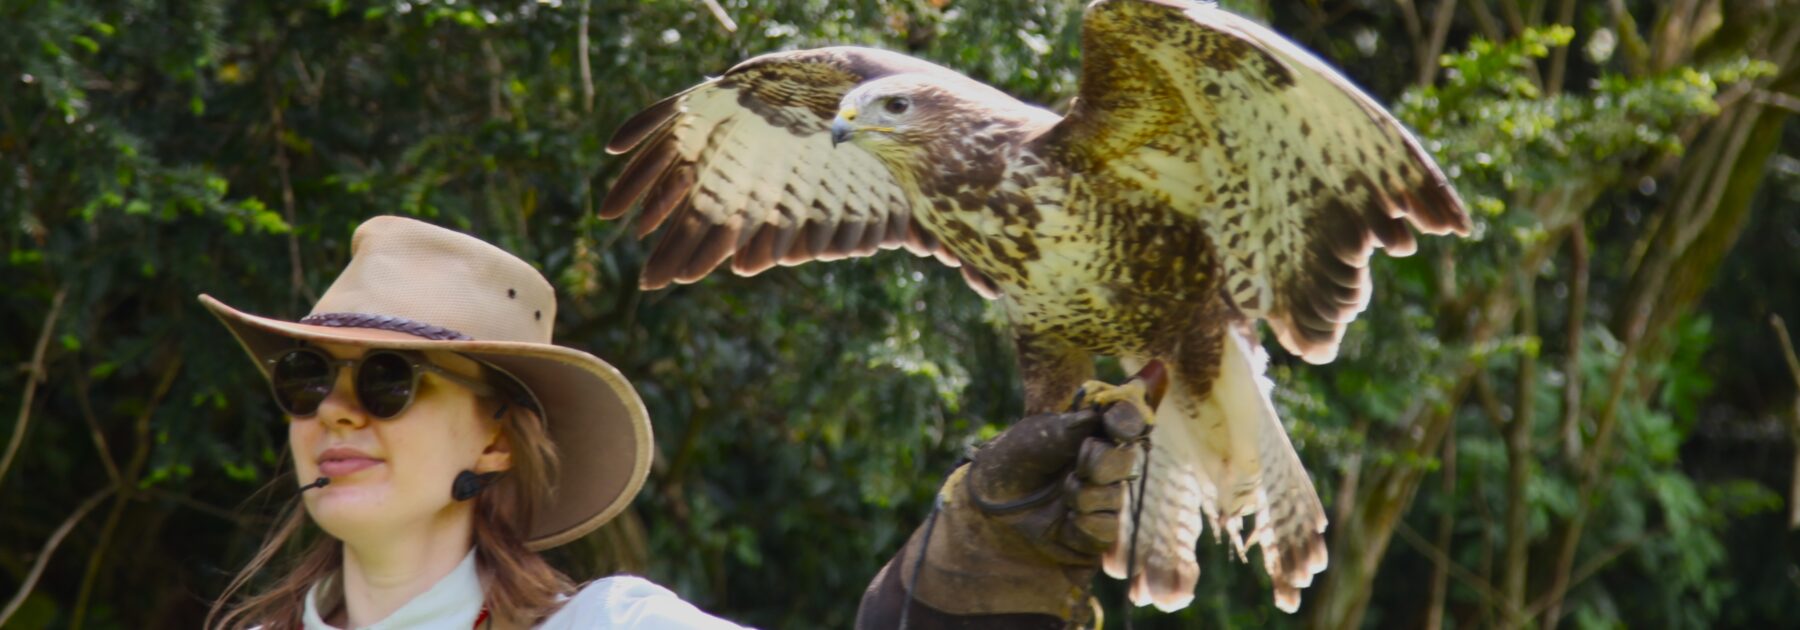 Engaging Encounters with Birds of Prey